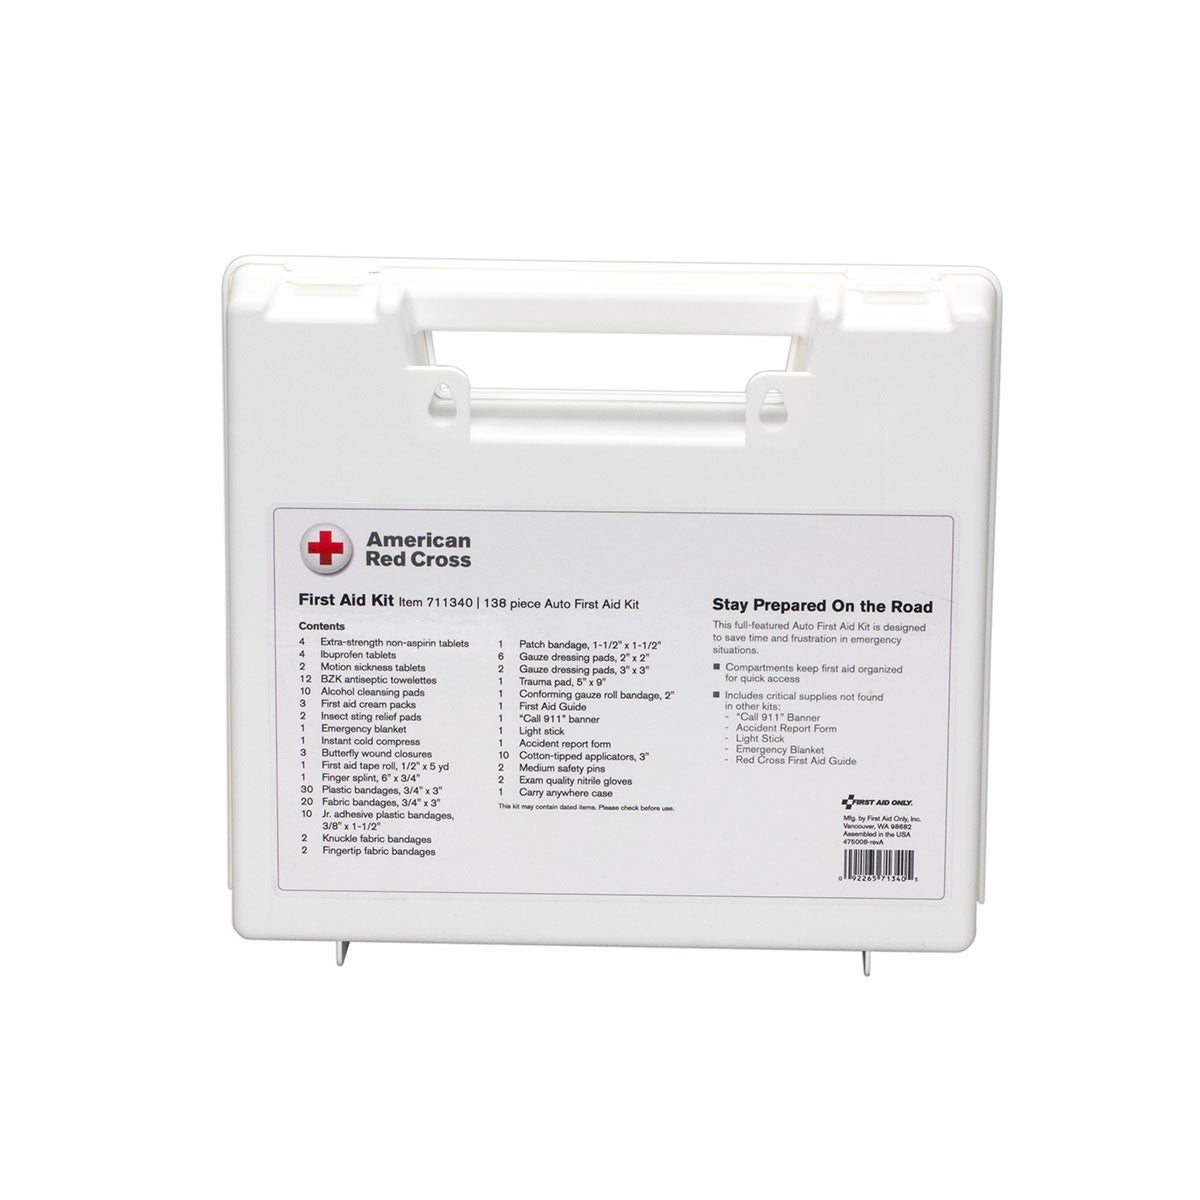 American Red Cross Deluxe Auto First Aid Kit - BS-FAK-711340-1-FM